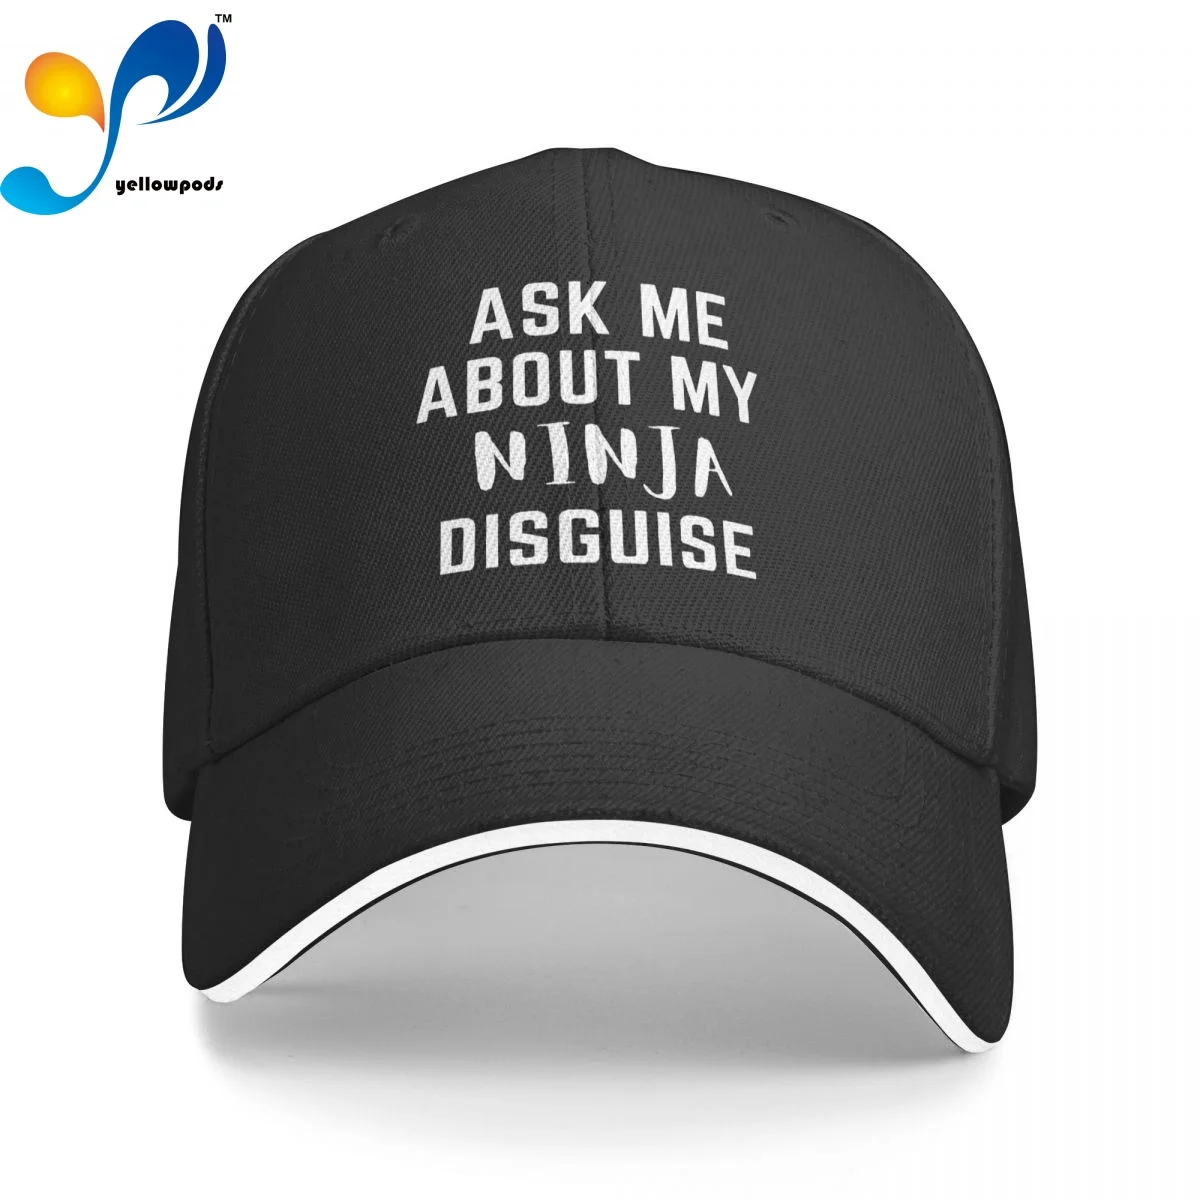 

ASK ME ABOUT MY NINJA DISGUISE Men's New Baseball Cap Fashion Sun Hats Caps for Men and Women